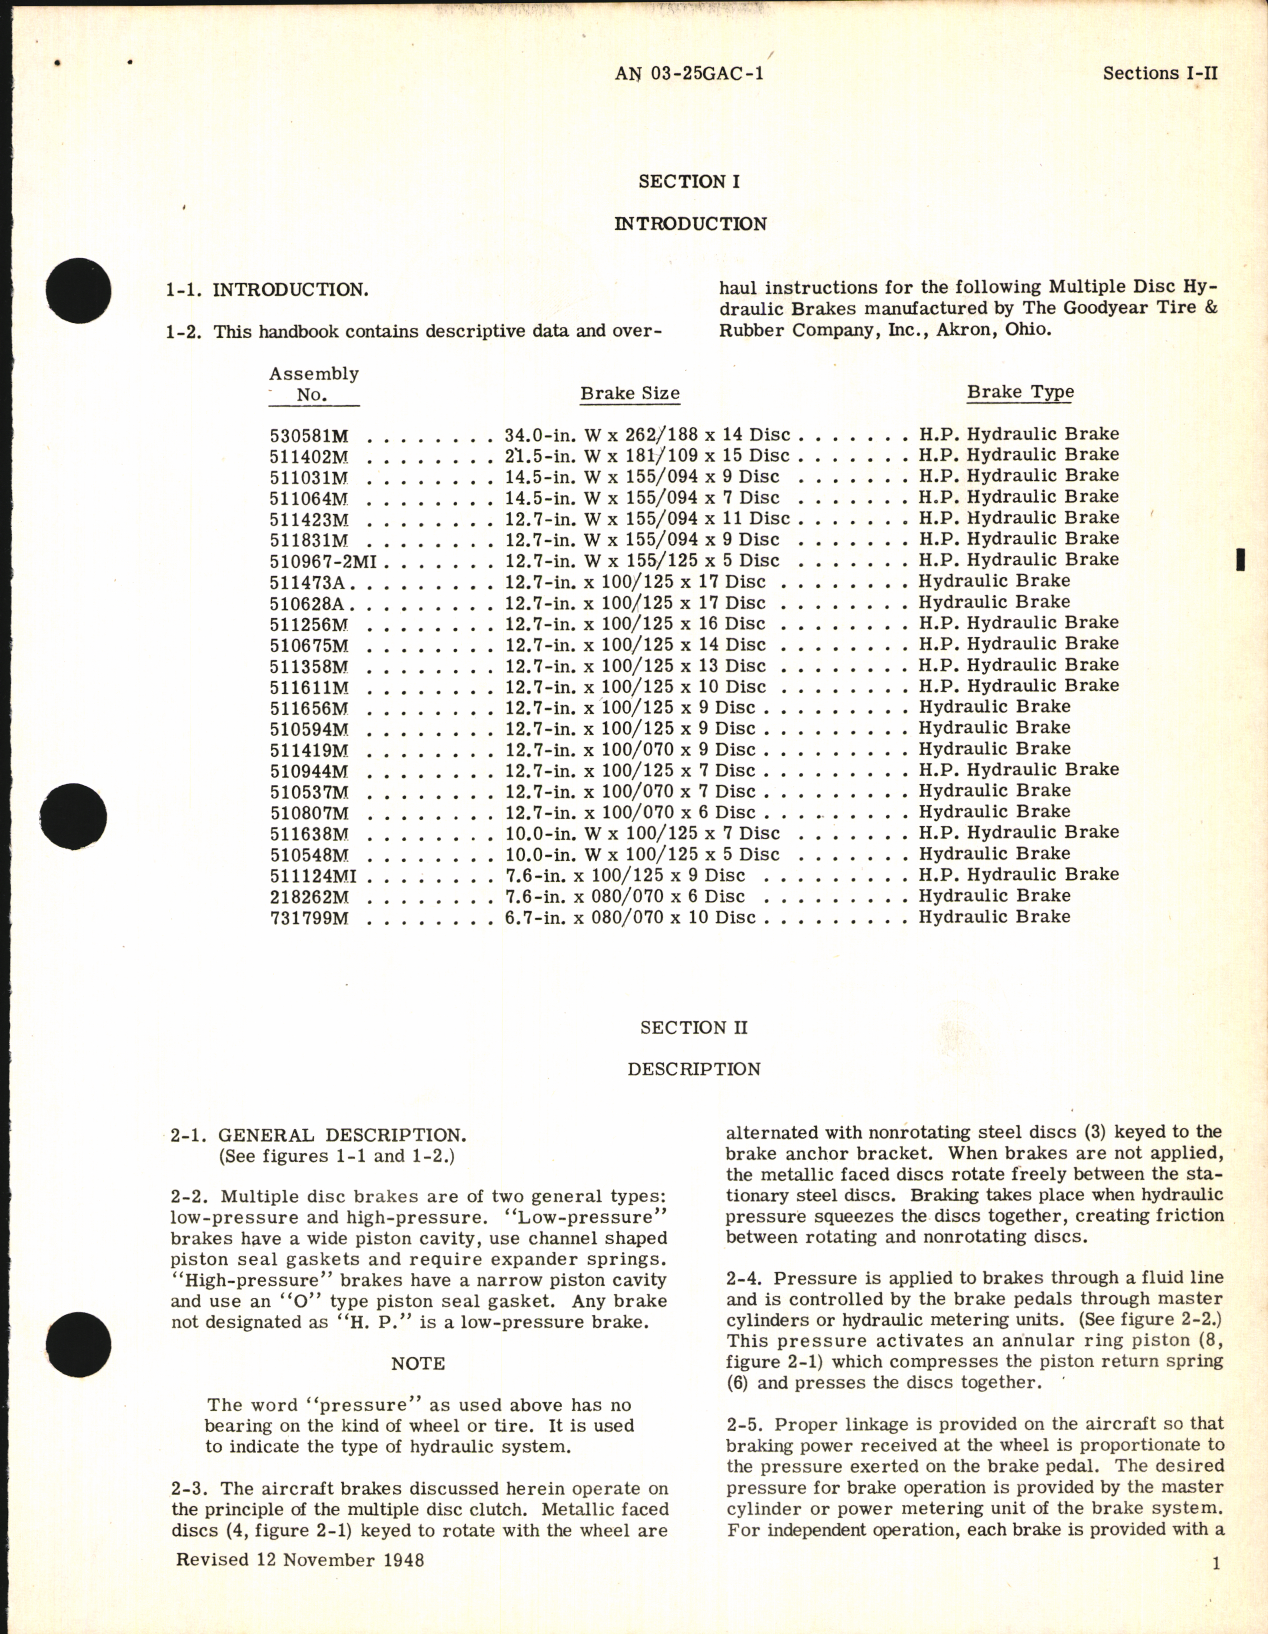 Sample page 5 from AirCorps Library document: Overhaul Instructions for Multiple Disc Brakes (Goodyear)